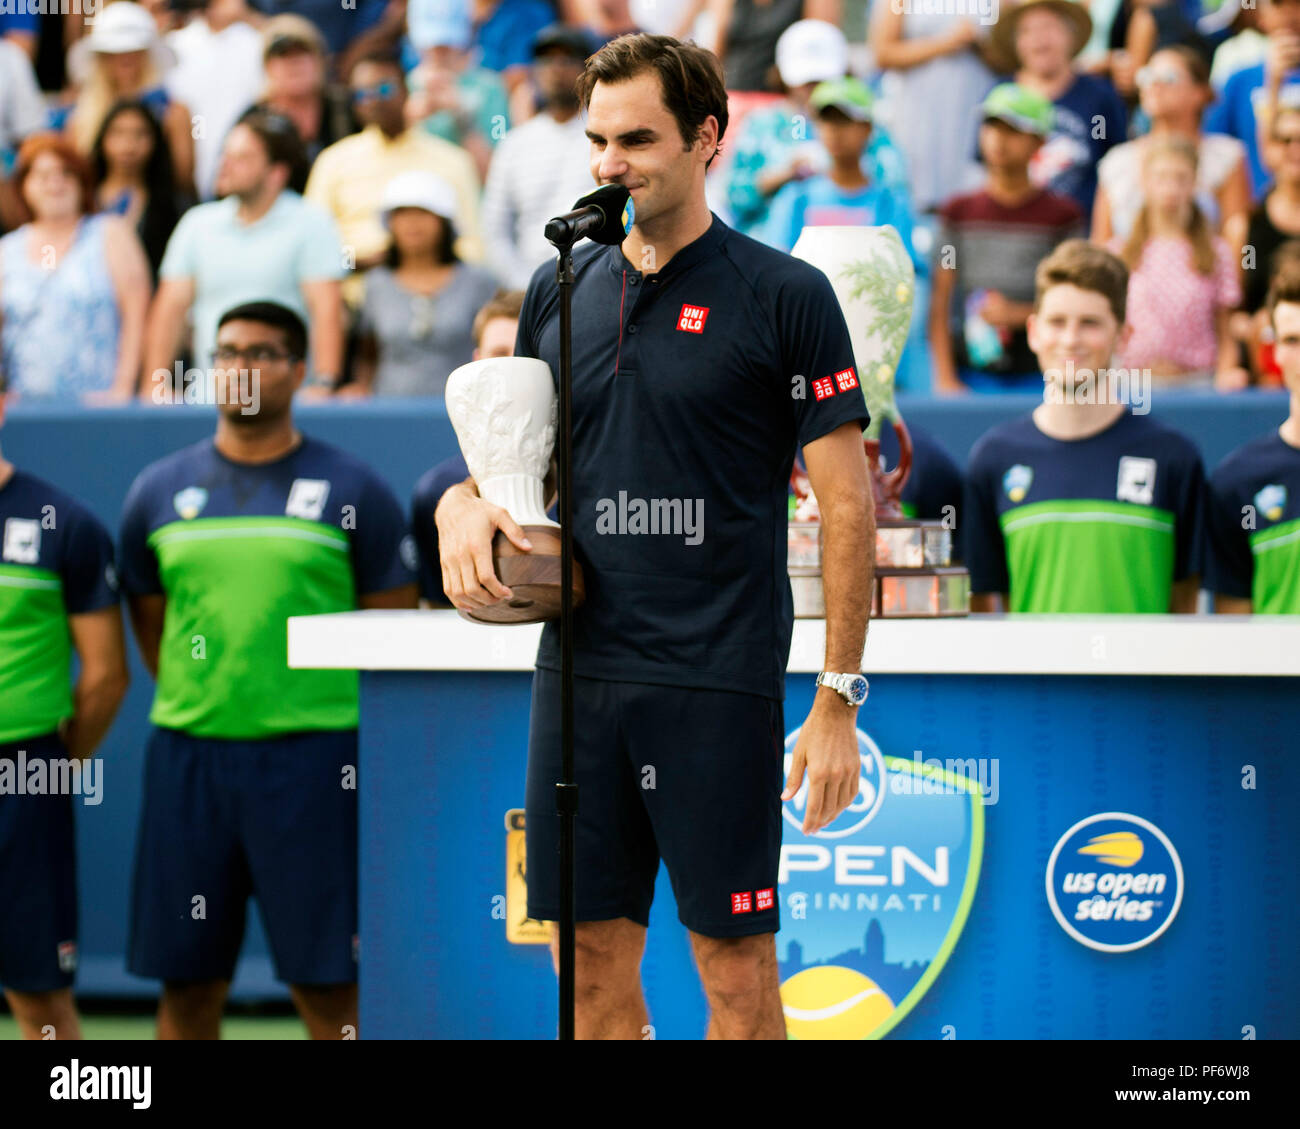 Mason, Ohio, USA. August 19, 2018: Roger Federer (SUI) during the award ceremony at the Western Southern Open in Mason, Ohio, USA. Brent Clark/Alamy Live News Stock Photo